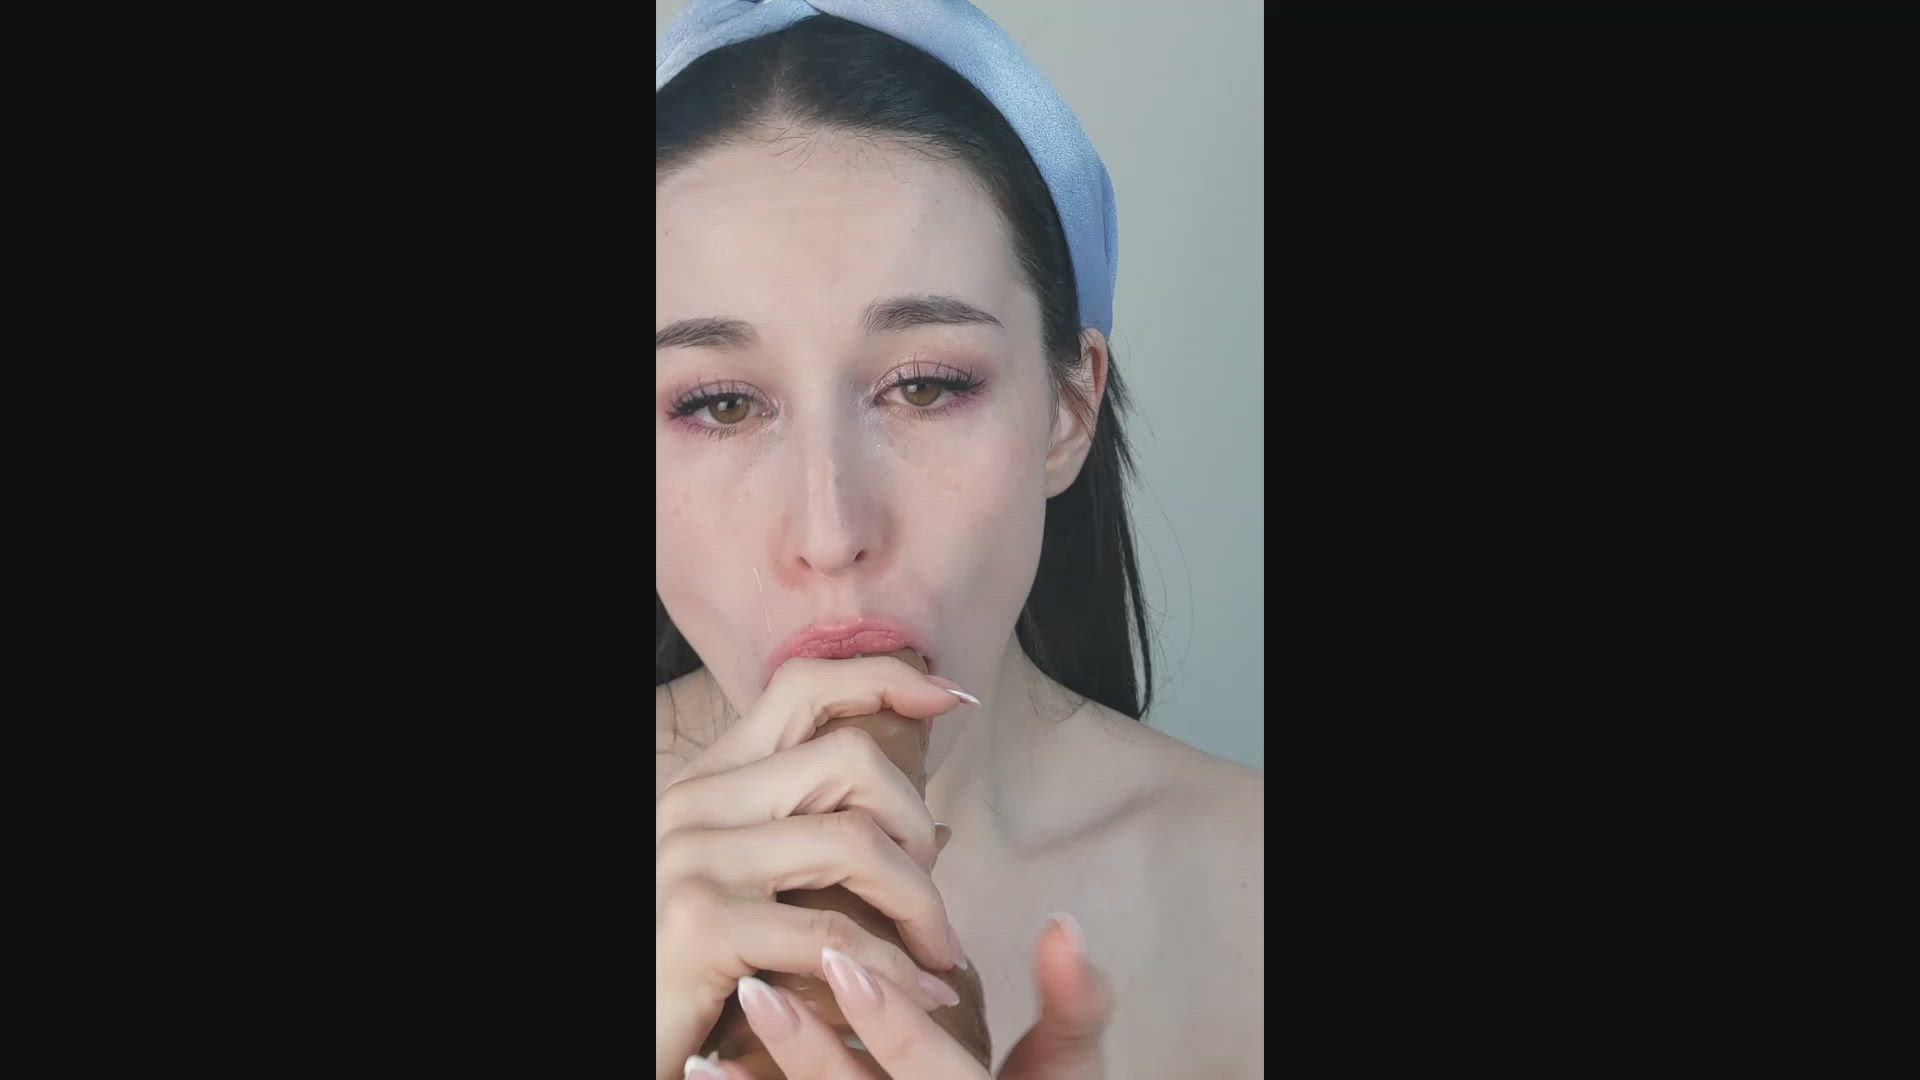 Deepthroat porn video with onlyfans model Vicky Peaches <strong>@vickypeaches</strong>